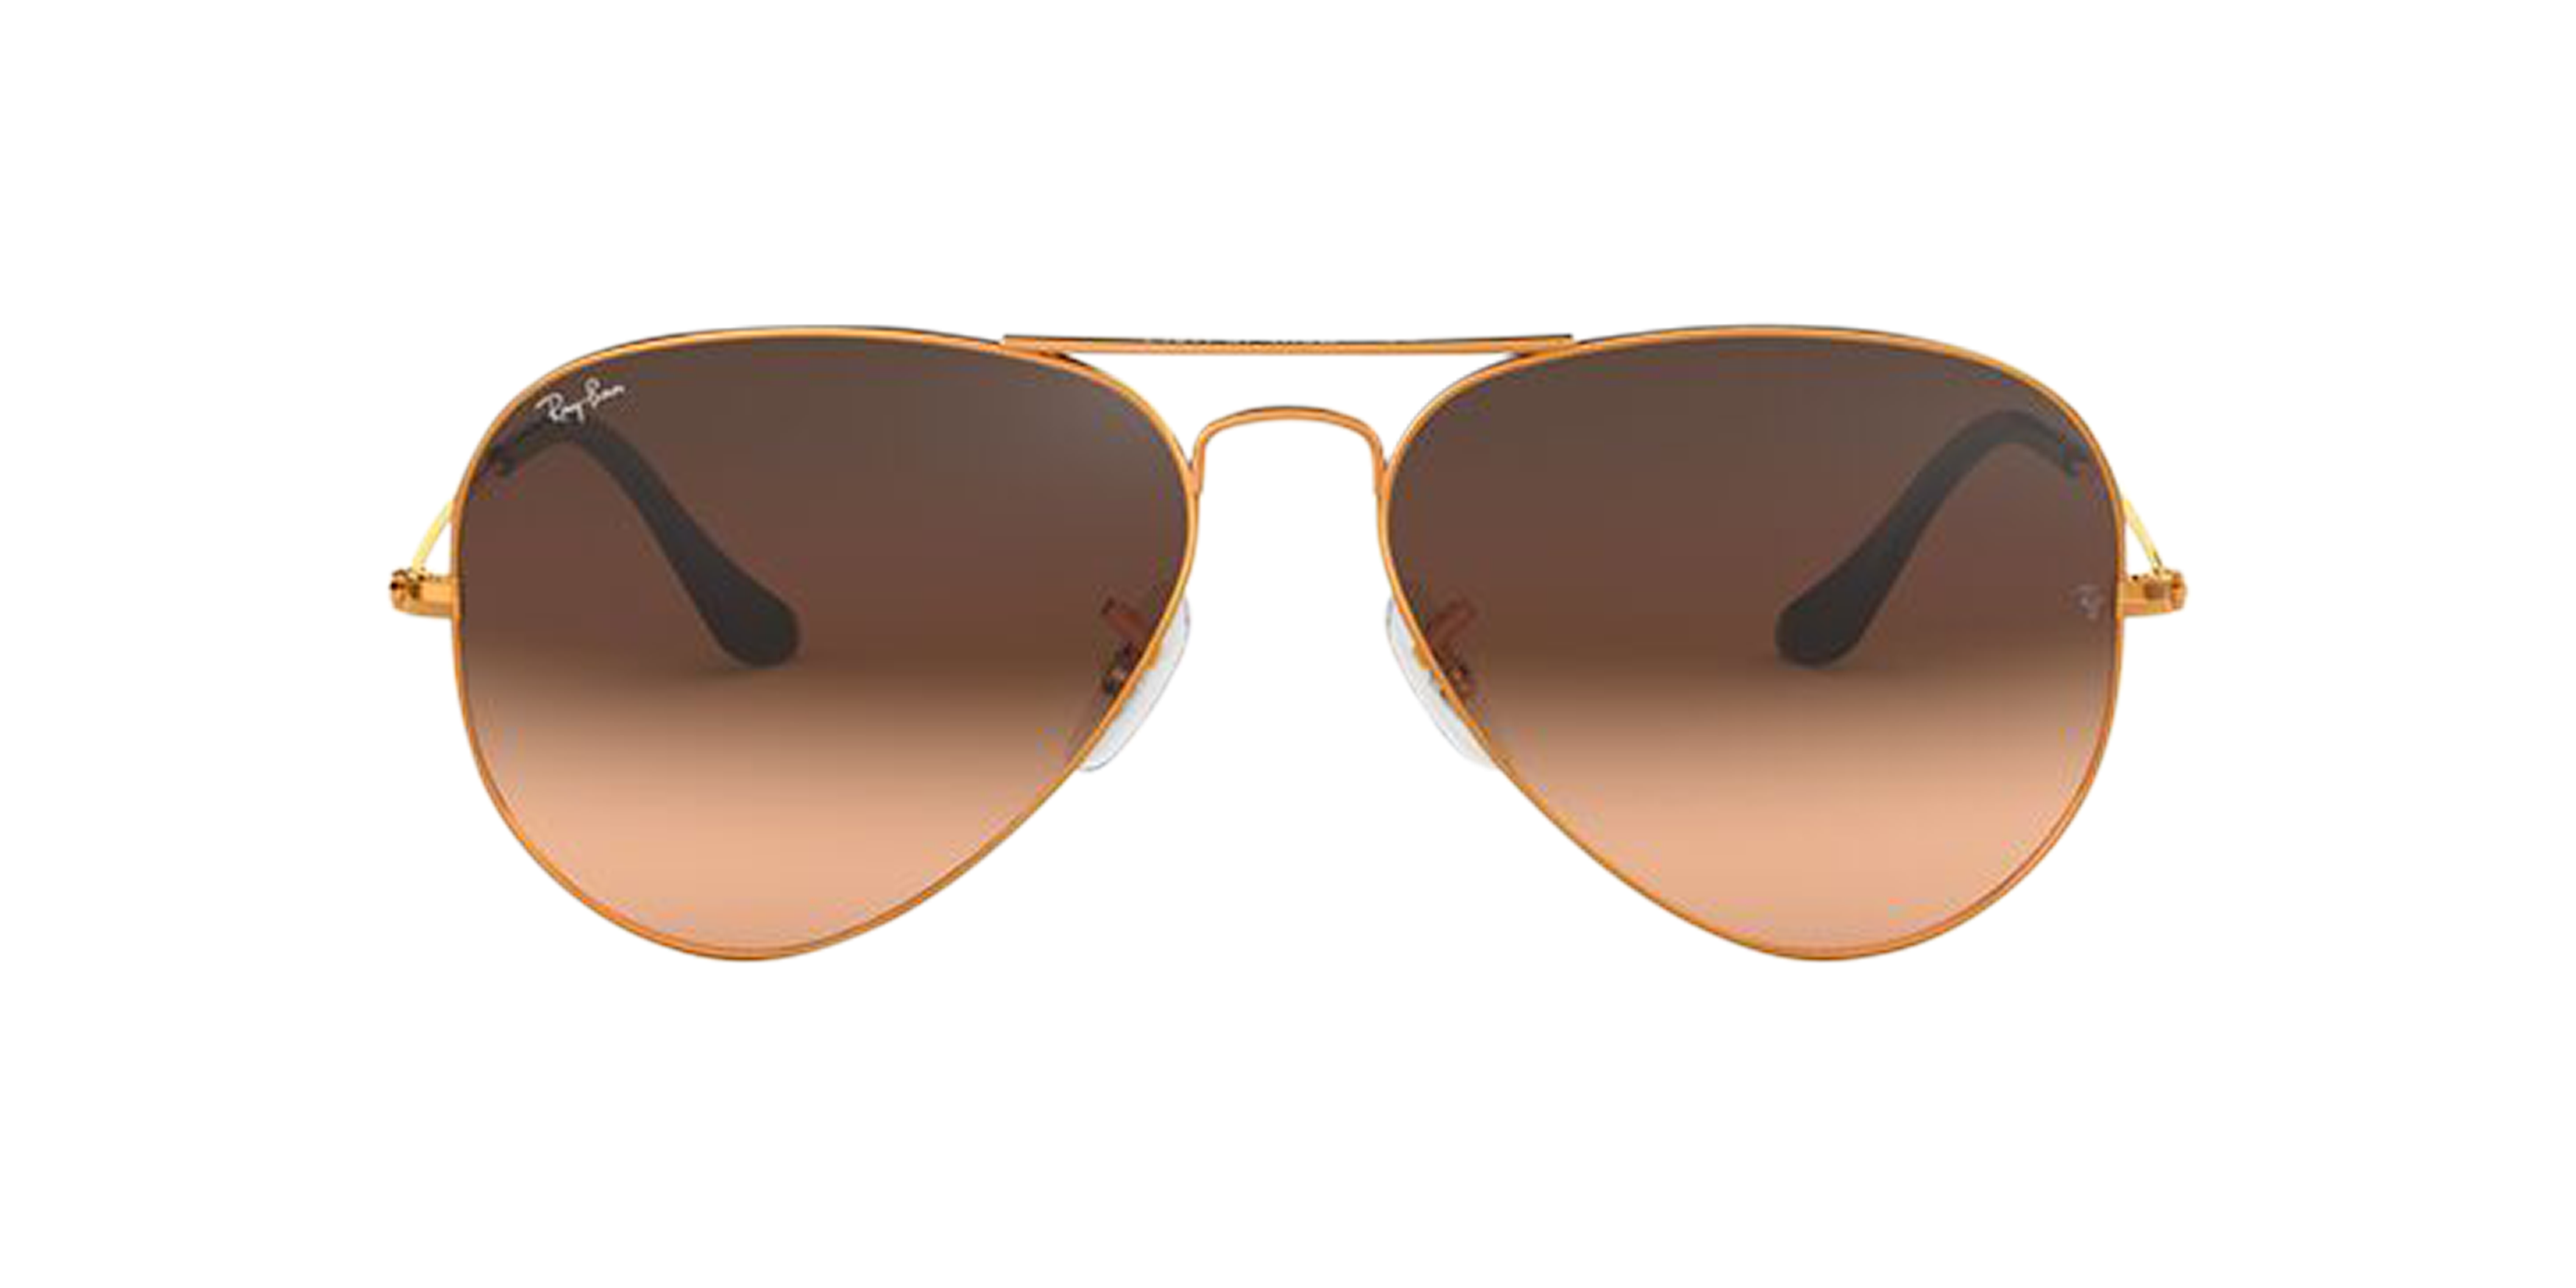 [products.image.front] RAY-BAN RB3025 9001A5